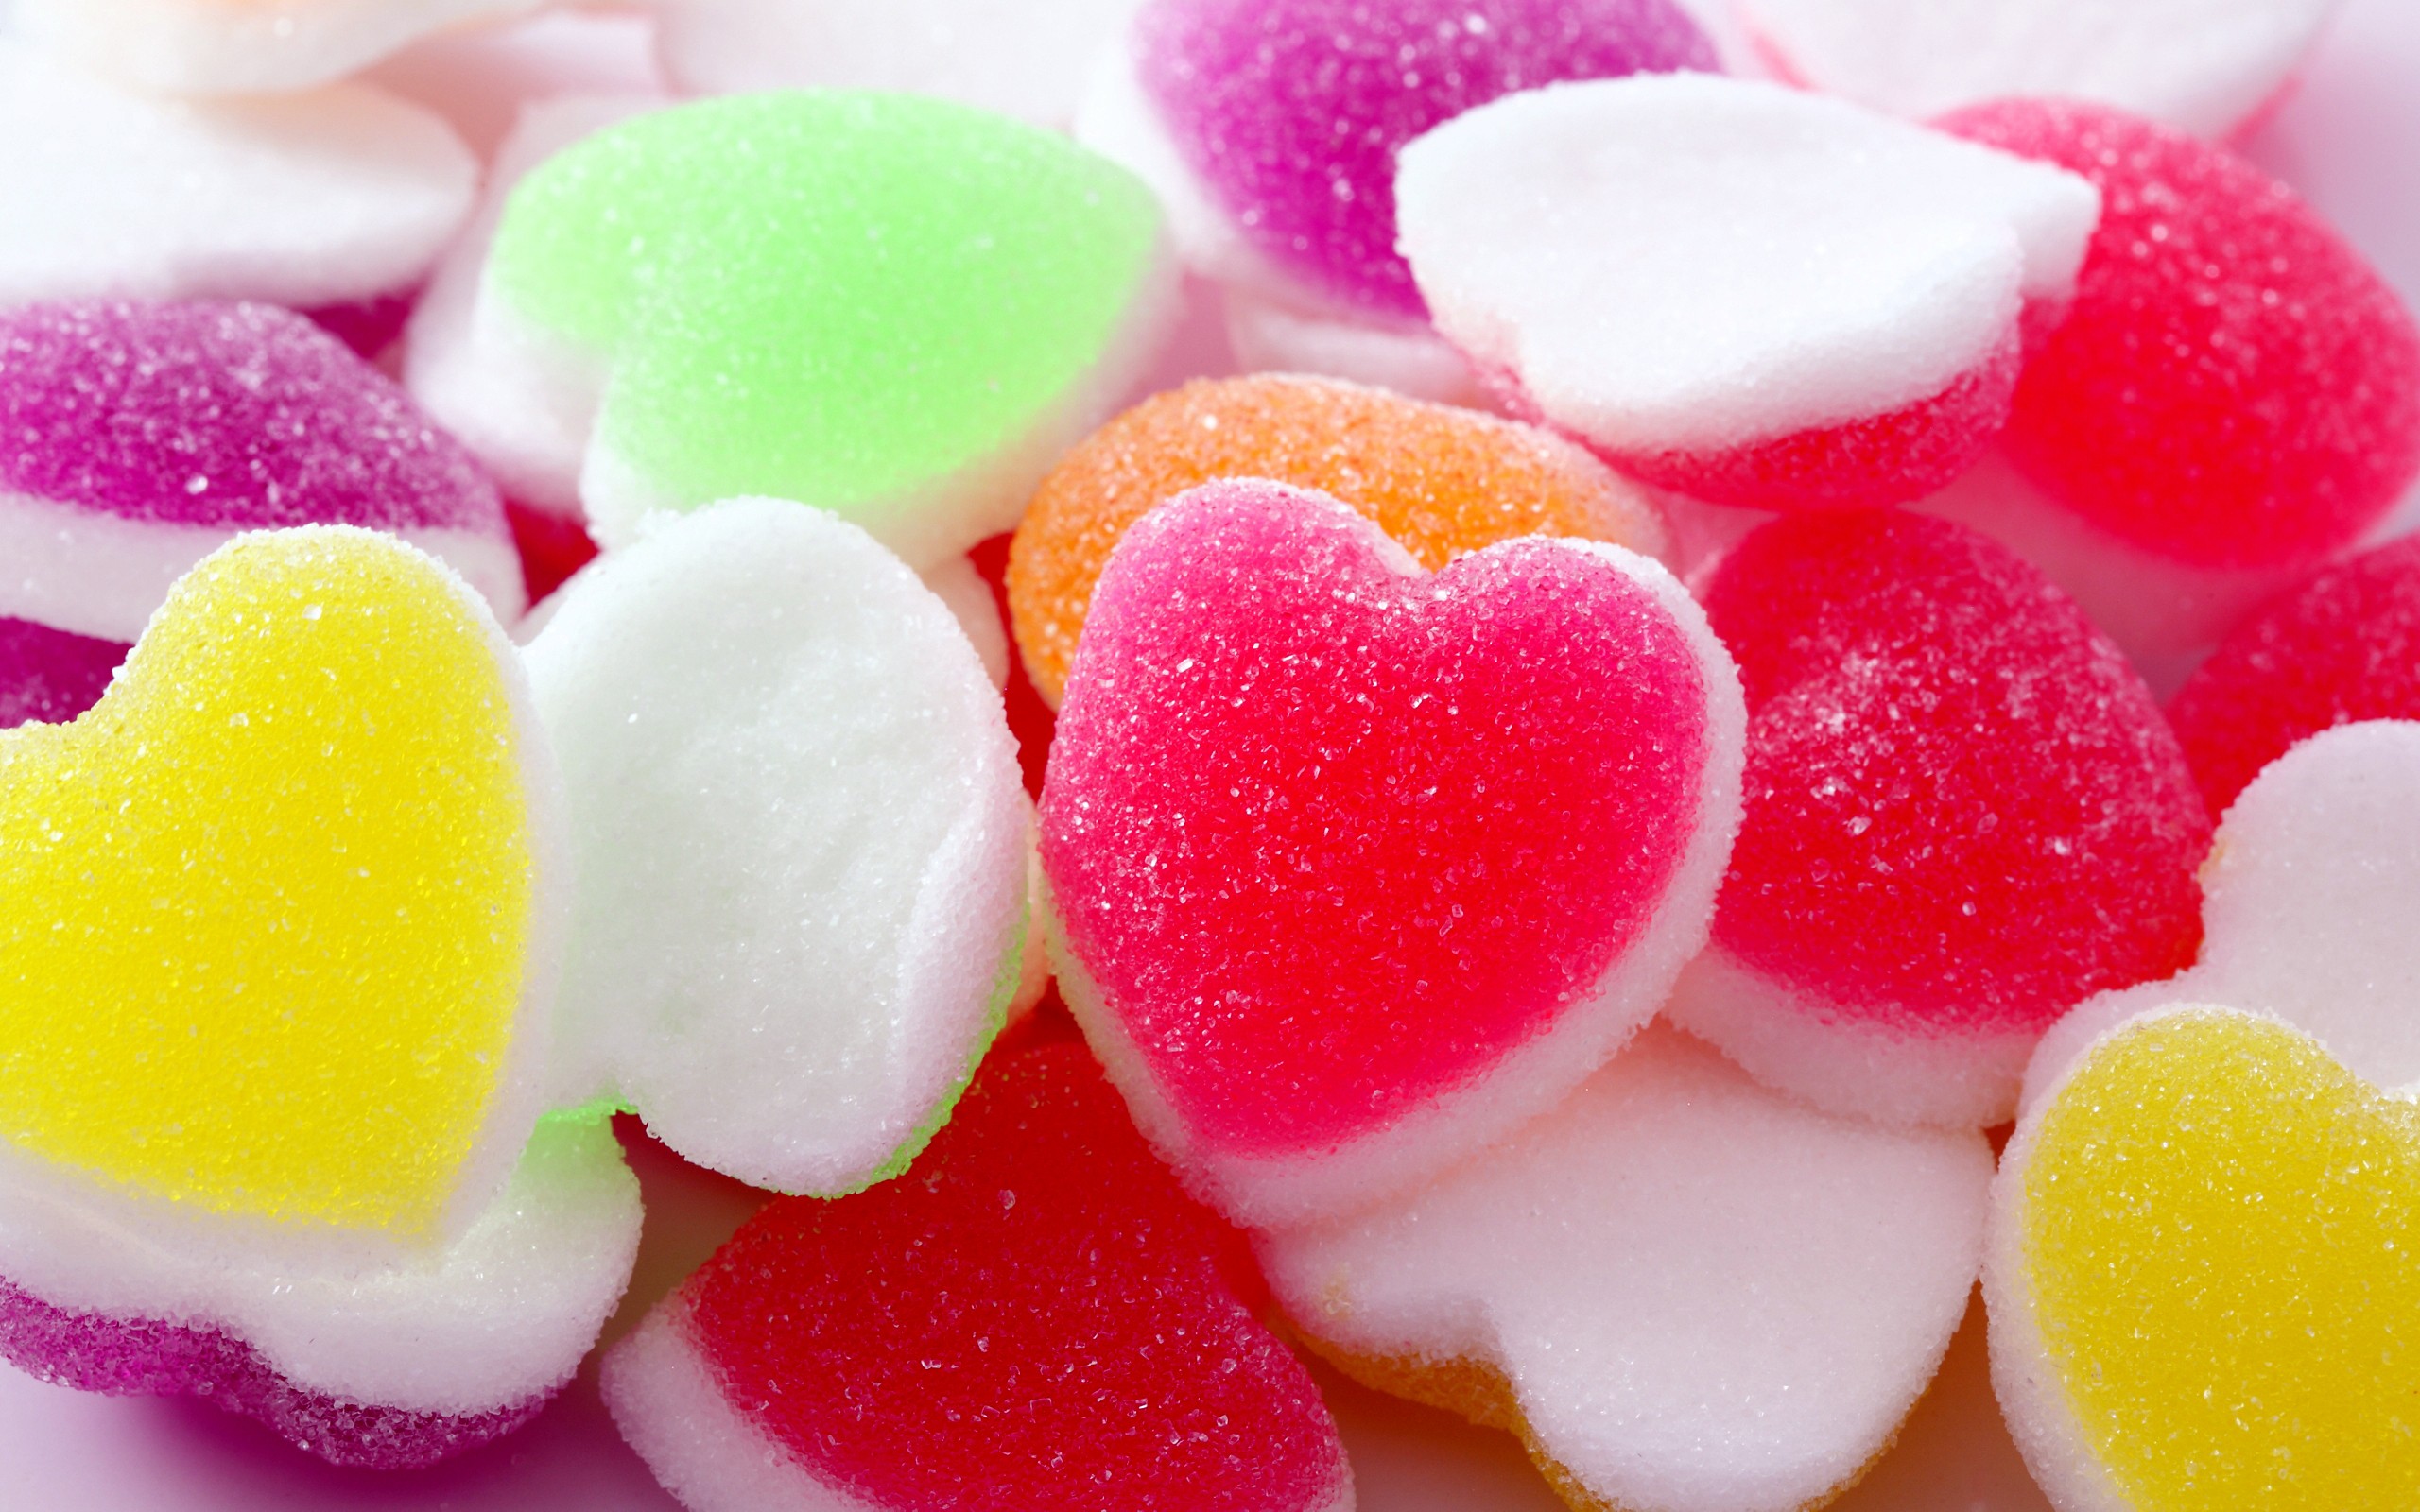 Colourful Cute Love Sweet Candy Wallpaper - HD Wallpapers